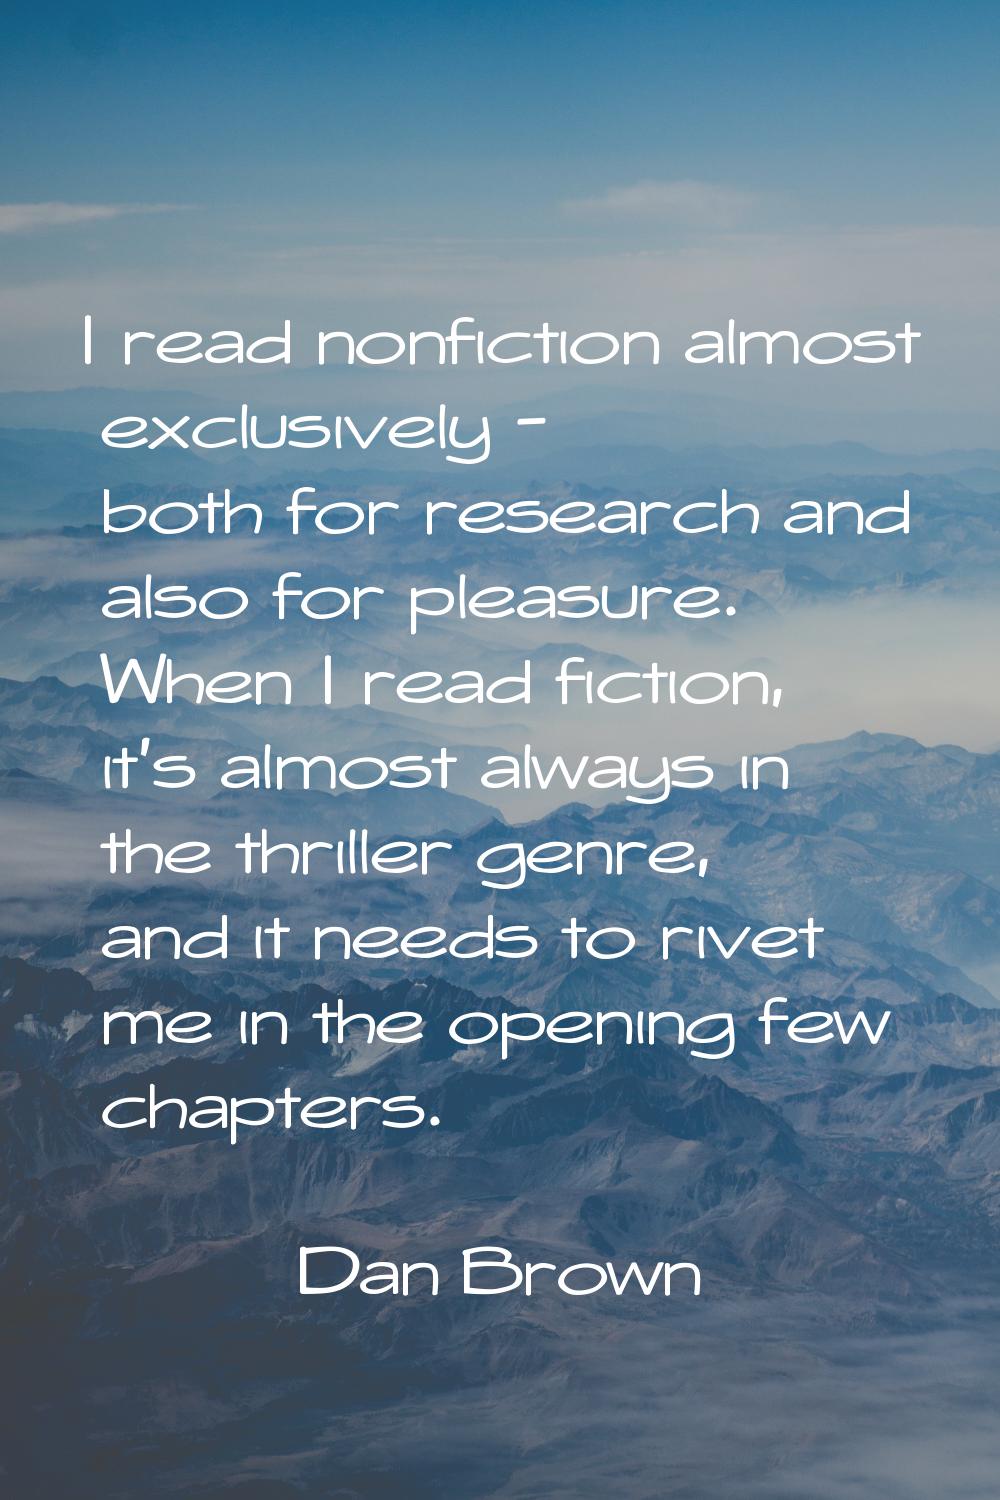 I read nonfiction almost exclusively - both for research and also for pleasure. When I read fiction